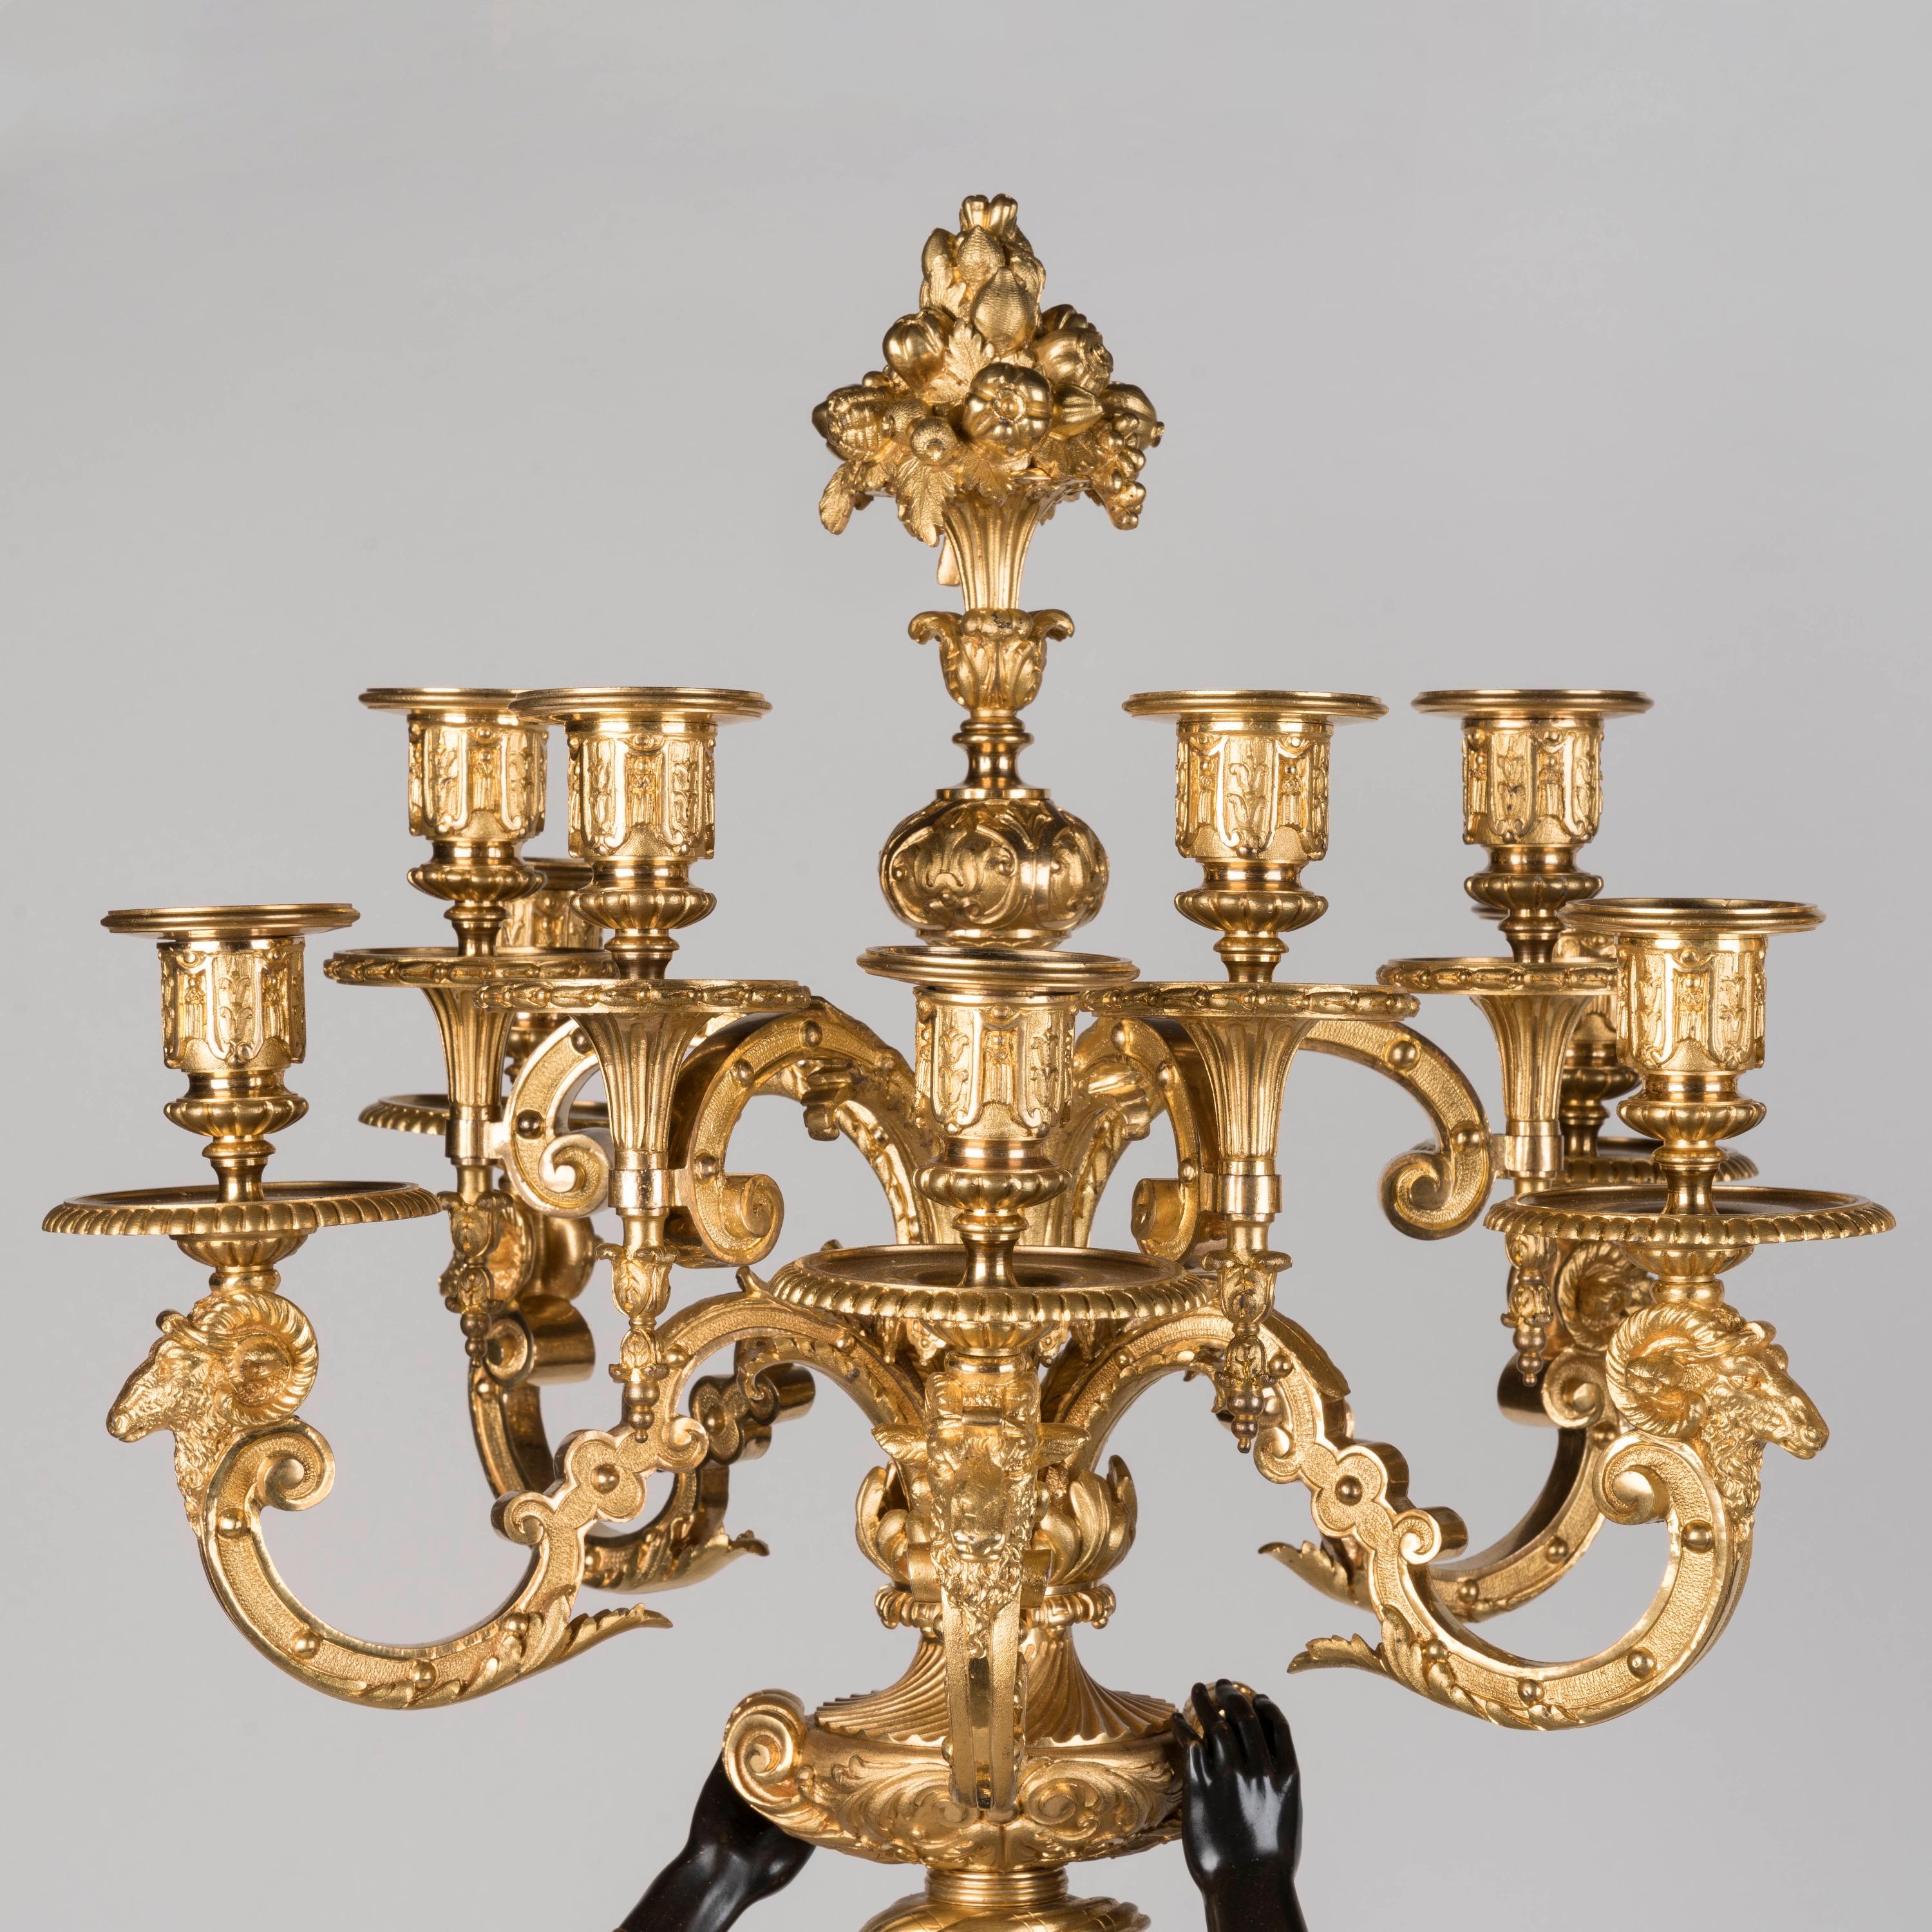 Pair of Large 19th Century Bronze and Gilded Figural Candelabra by Denière For Sale 4